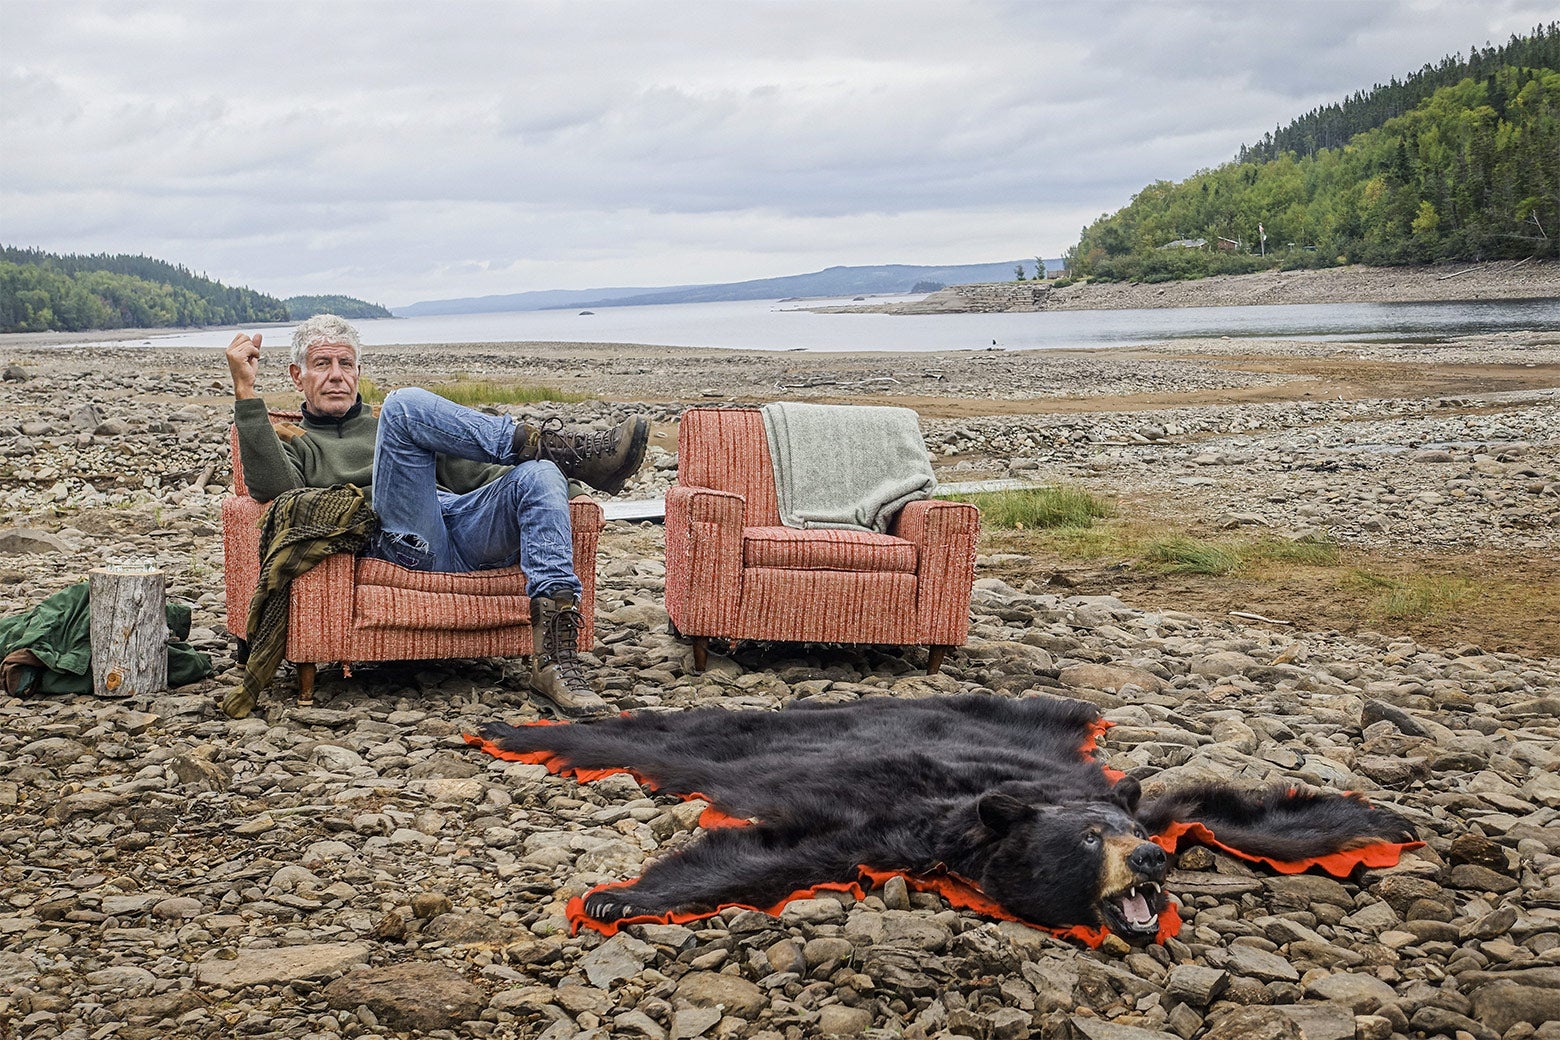 Anthony Bourdain sits in an upholstered chair on a rocky beach next to a bear rug.